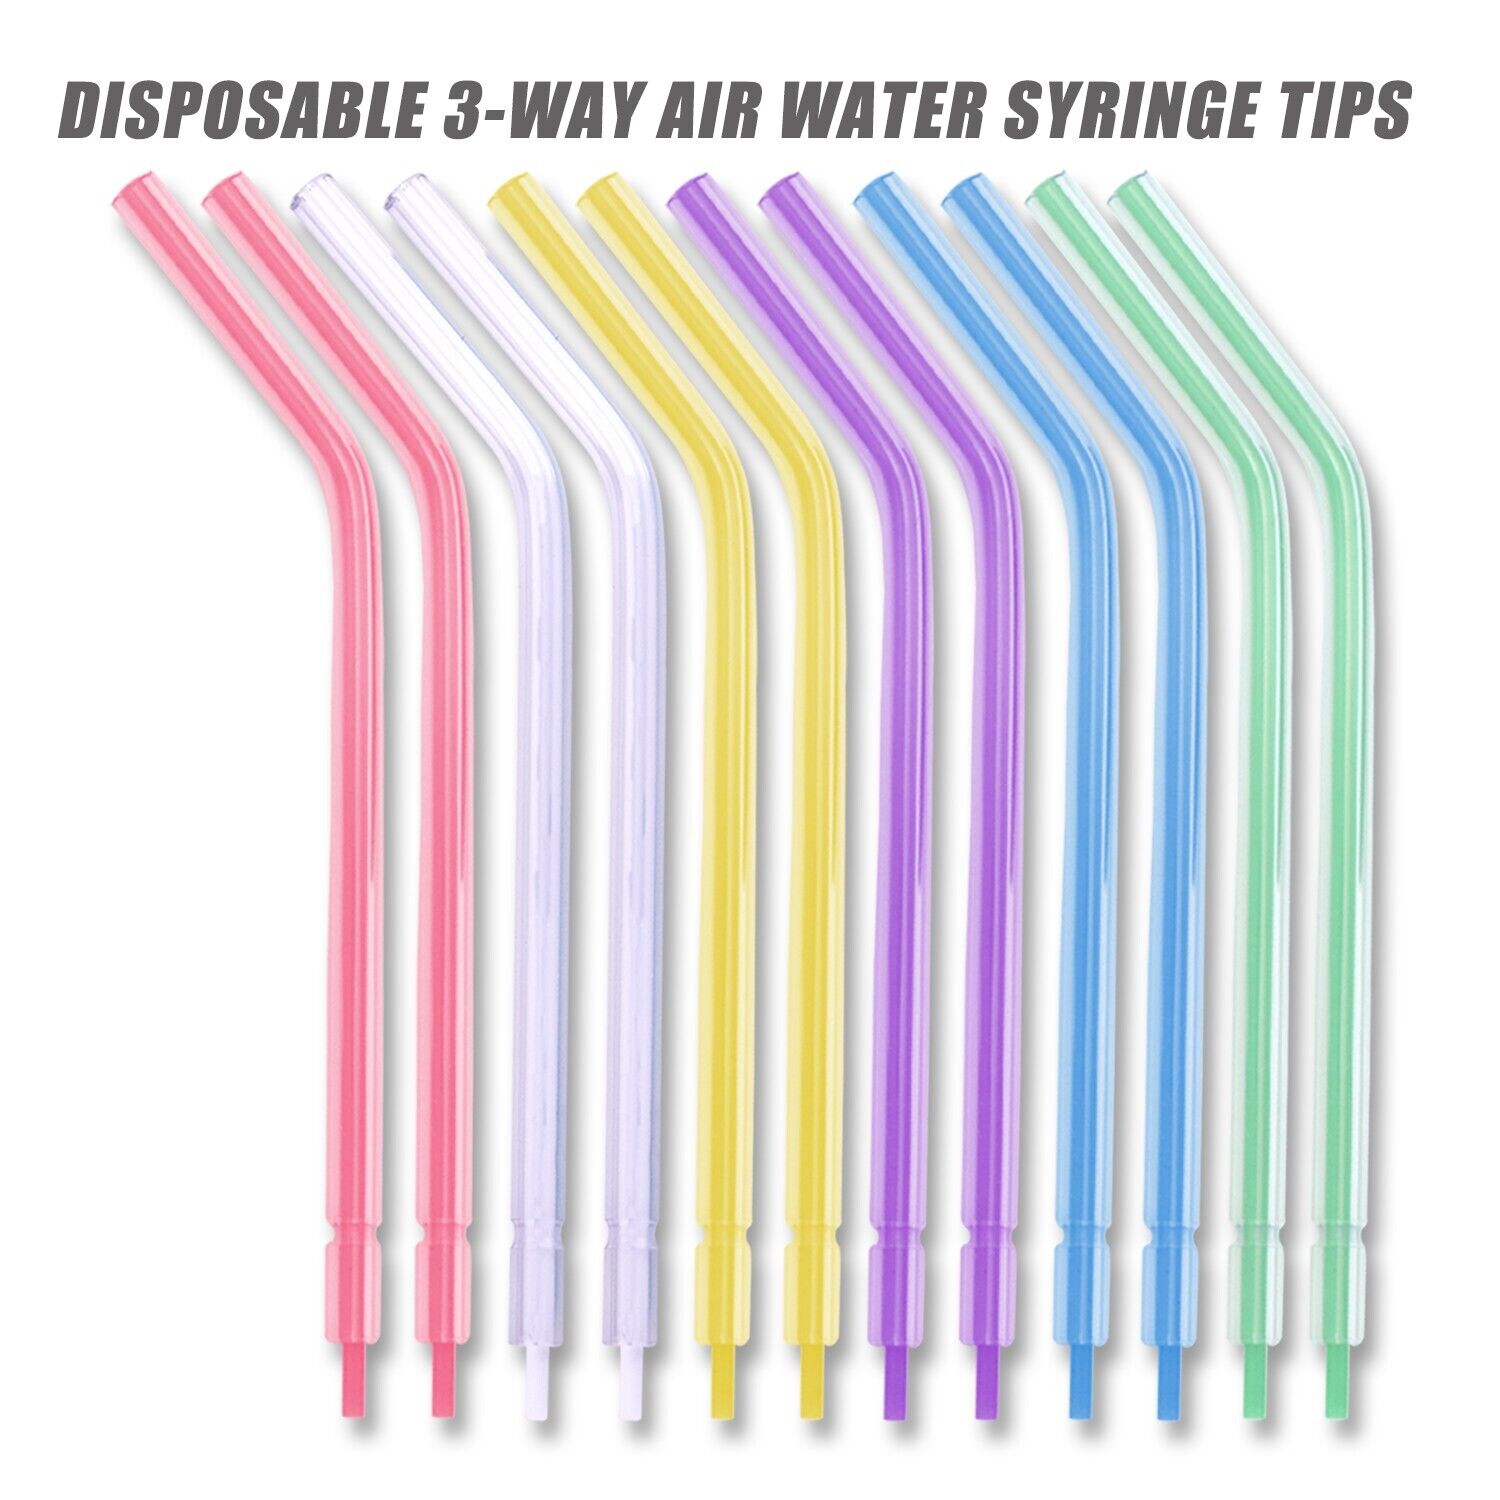 1500 Dental Disposable Air Water Syringe Tips, Rainbow Variety, (6 Bags of 250)